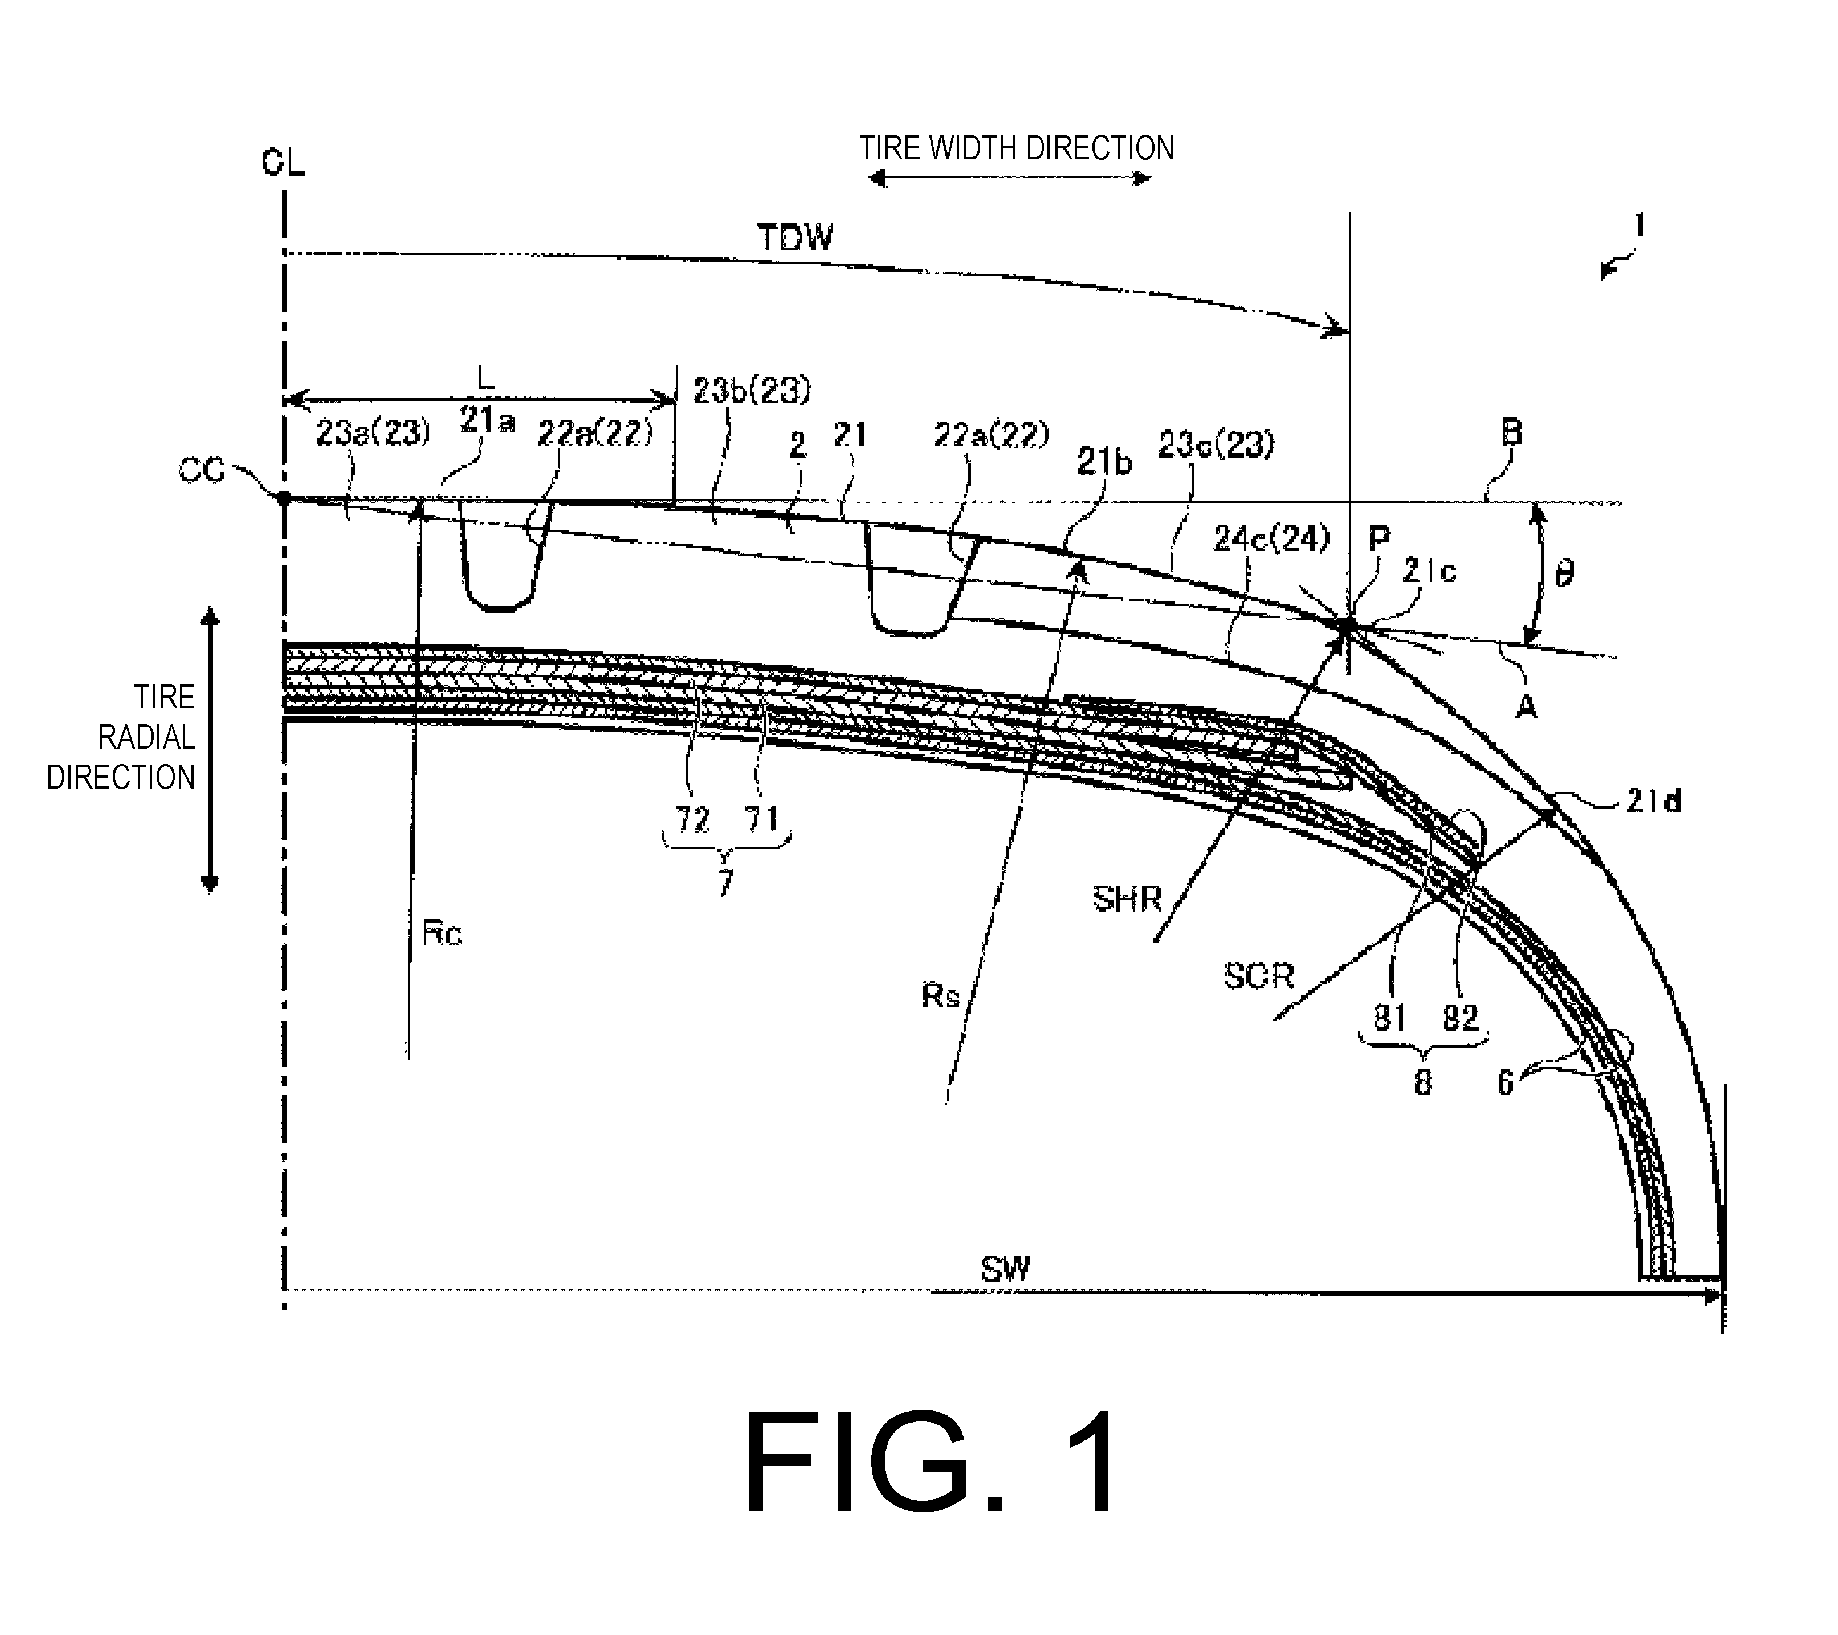 Pneumatic tire with tread having different curvature radii